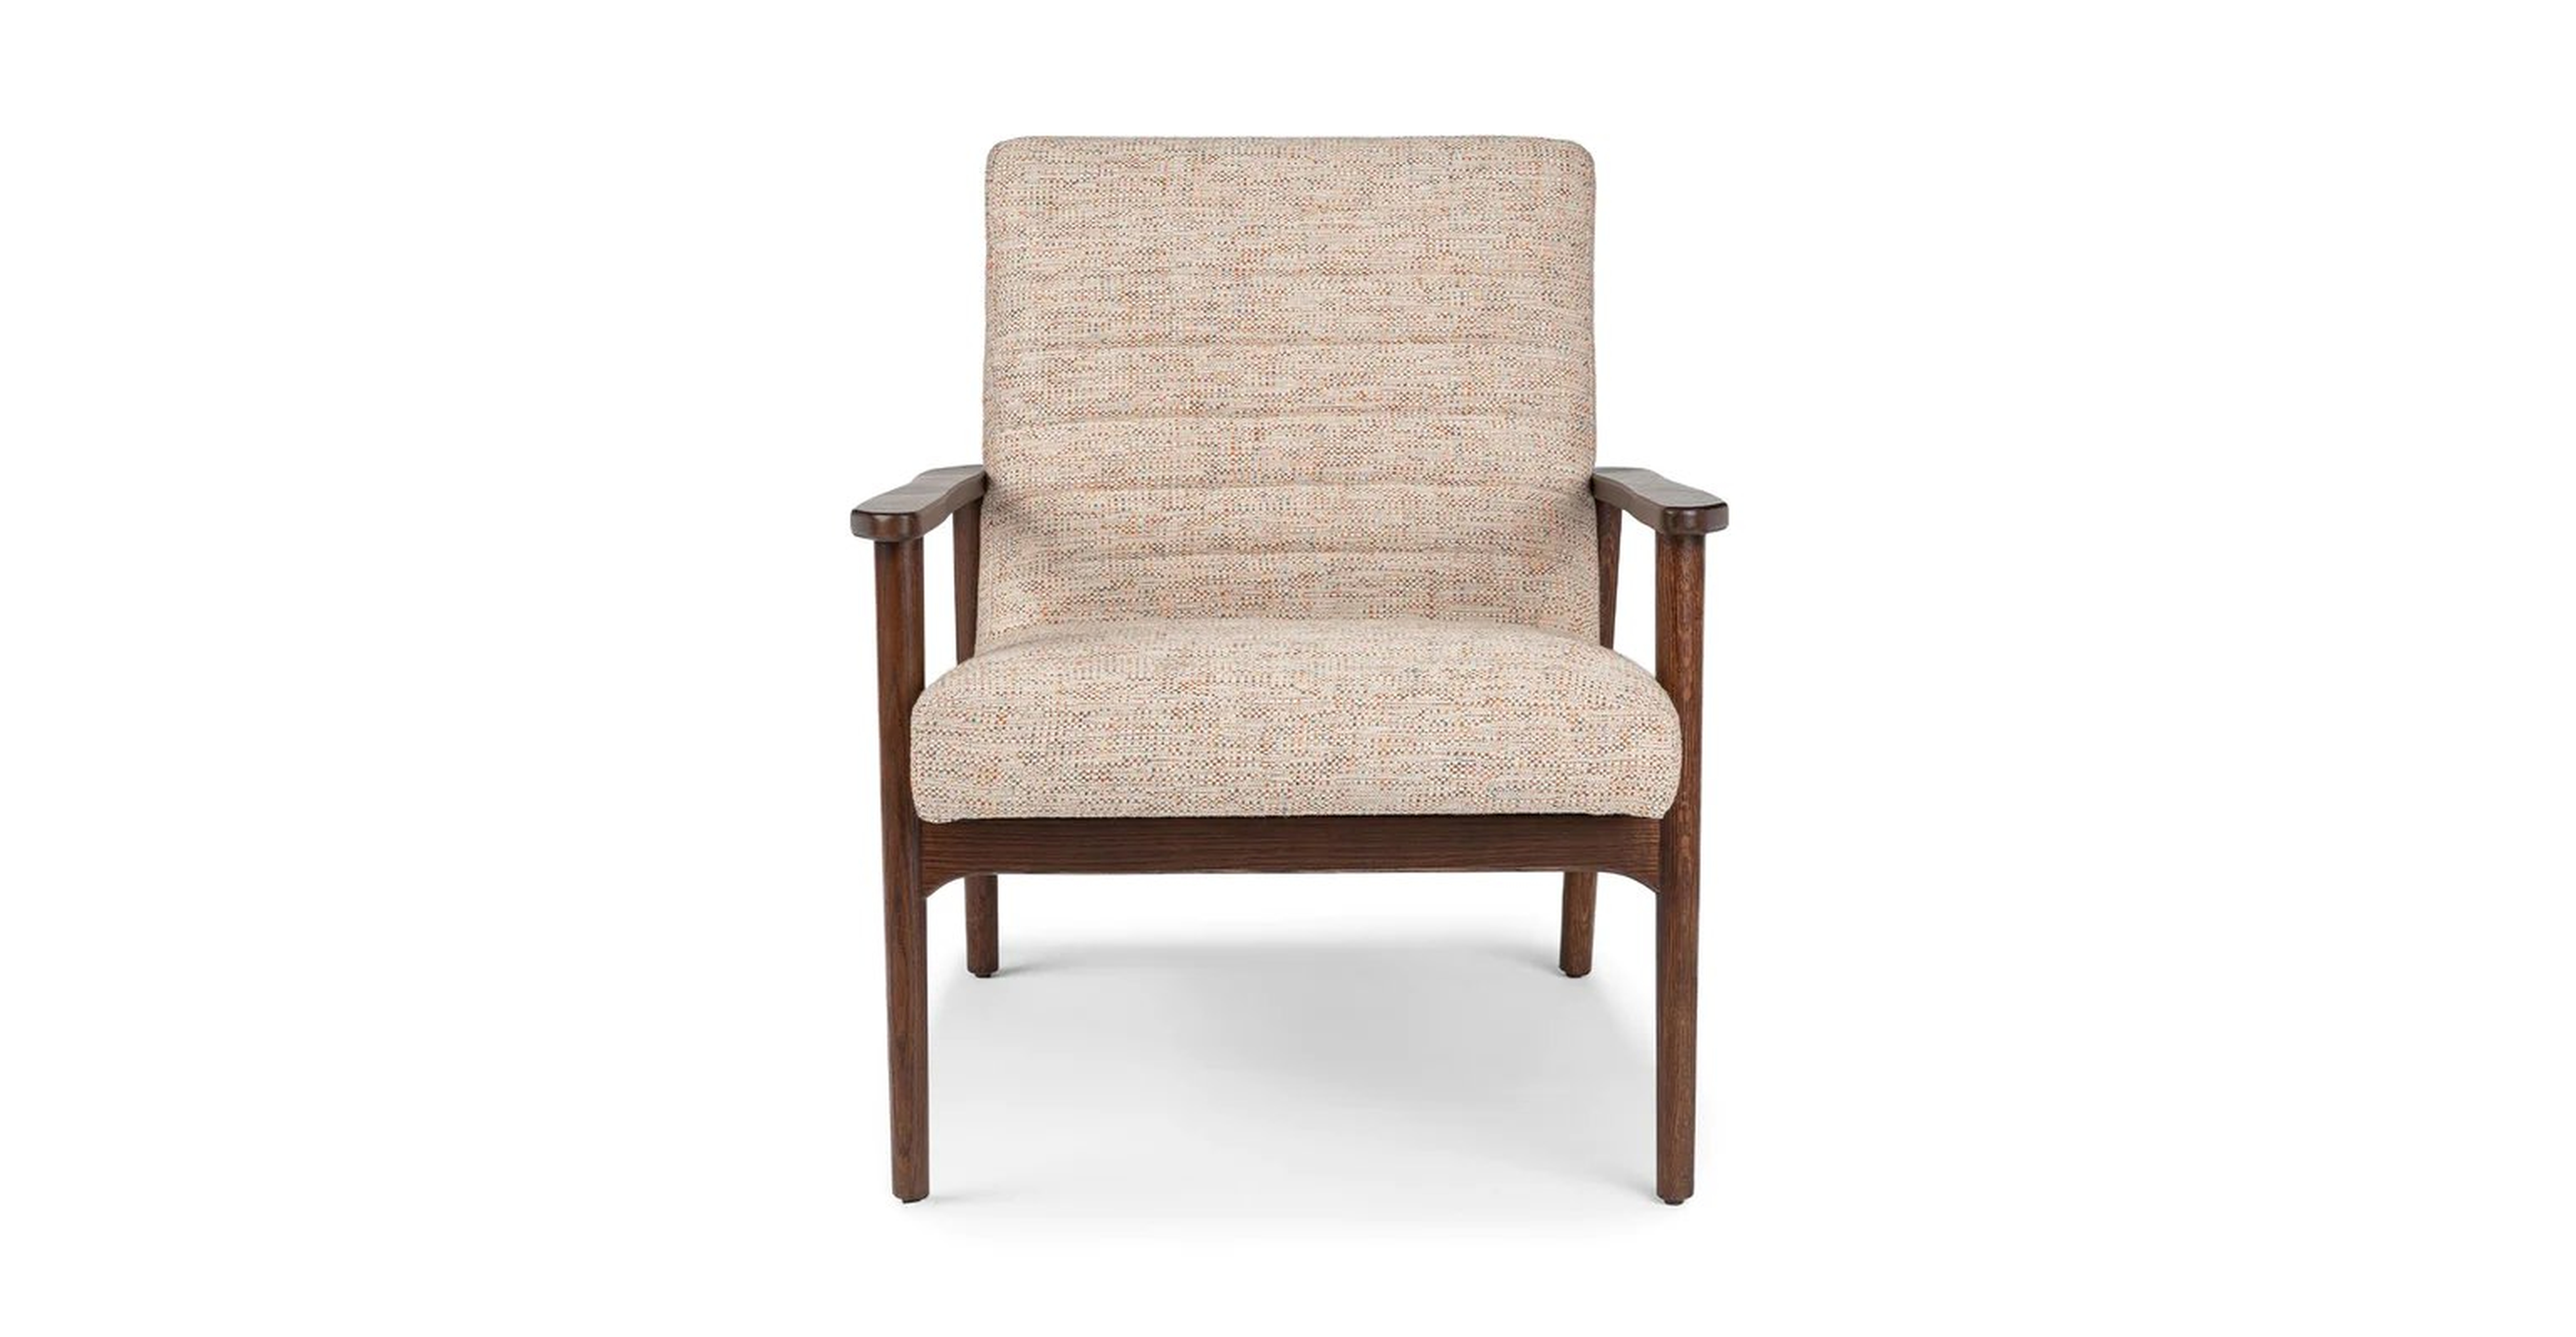 Thetis Flame Tweed Chair - Article